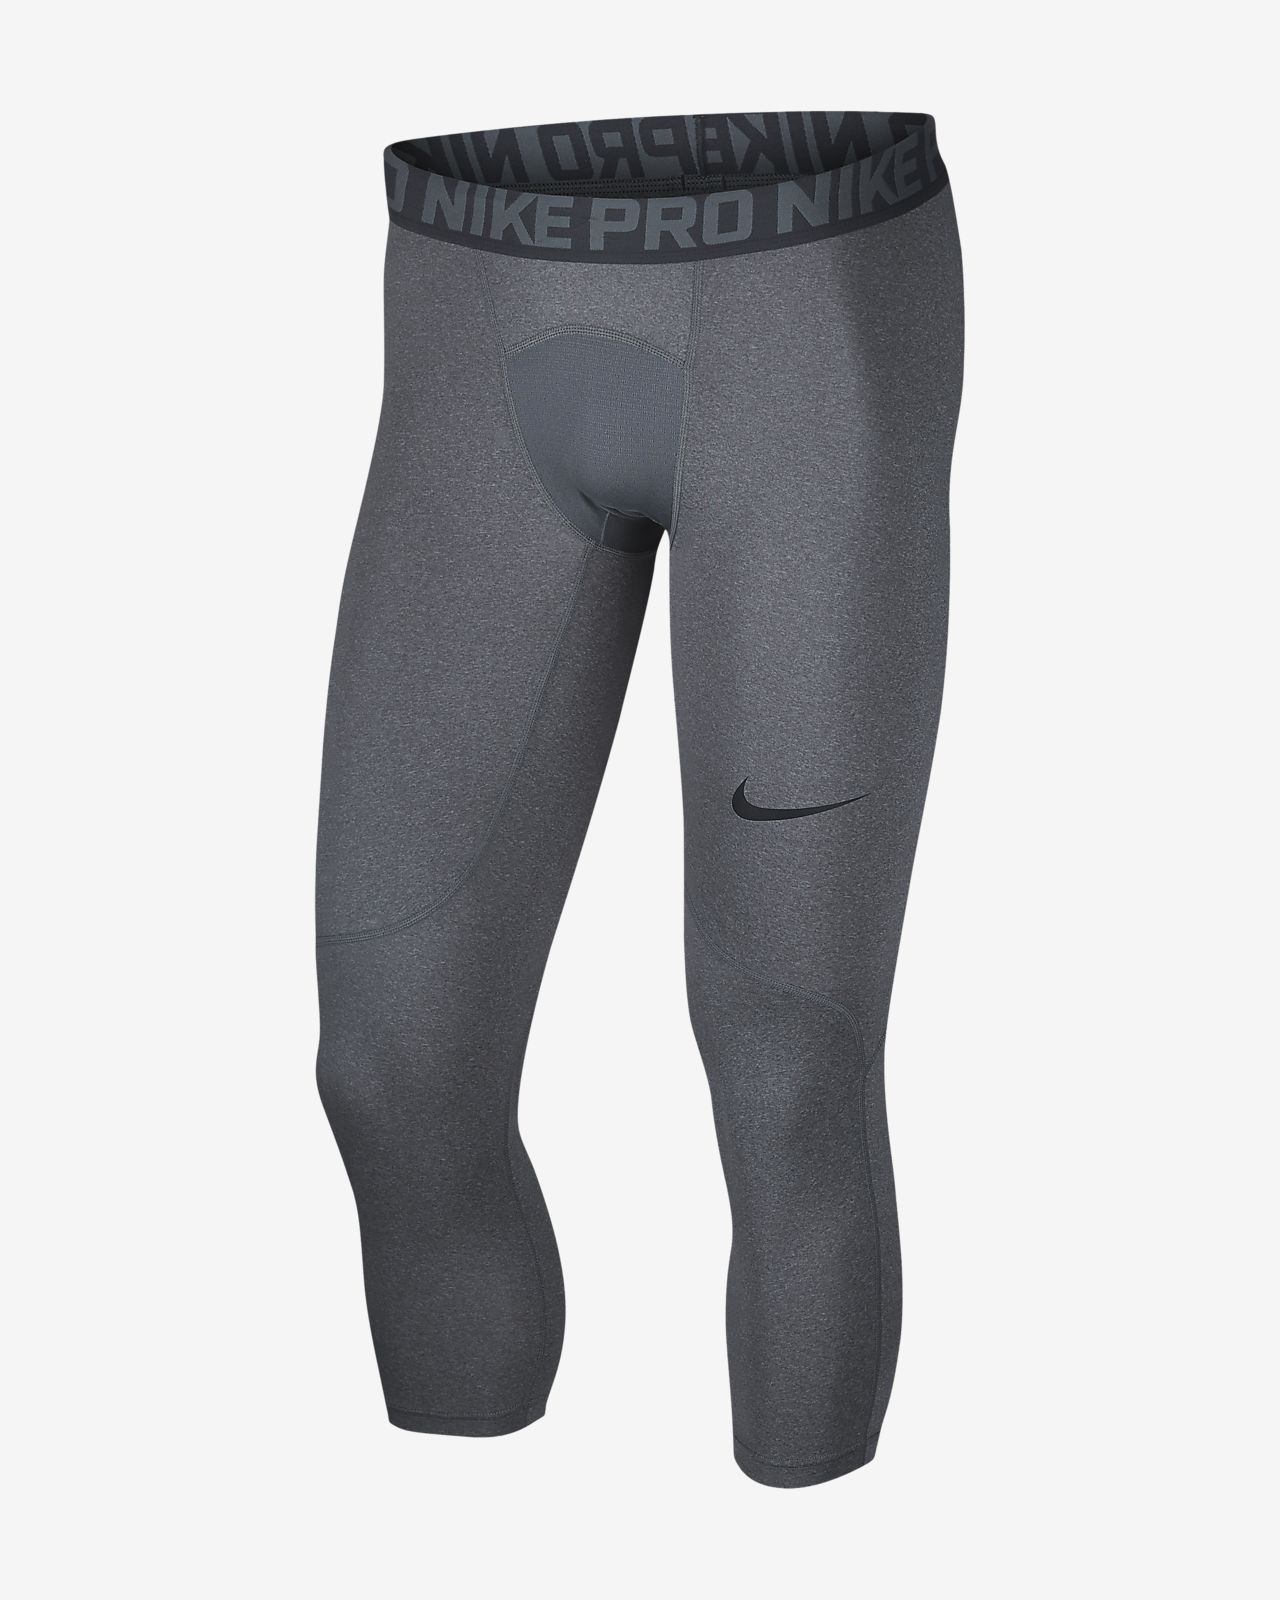 Nike 3 4 Tights Size Chart